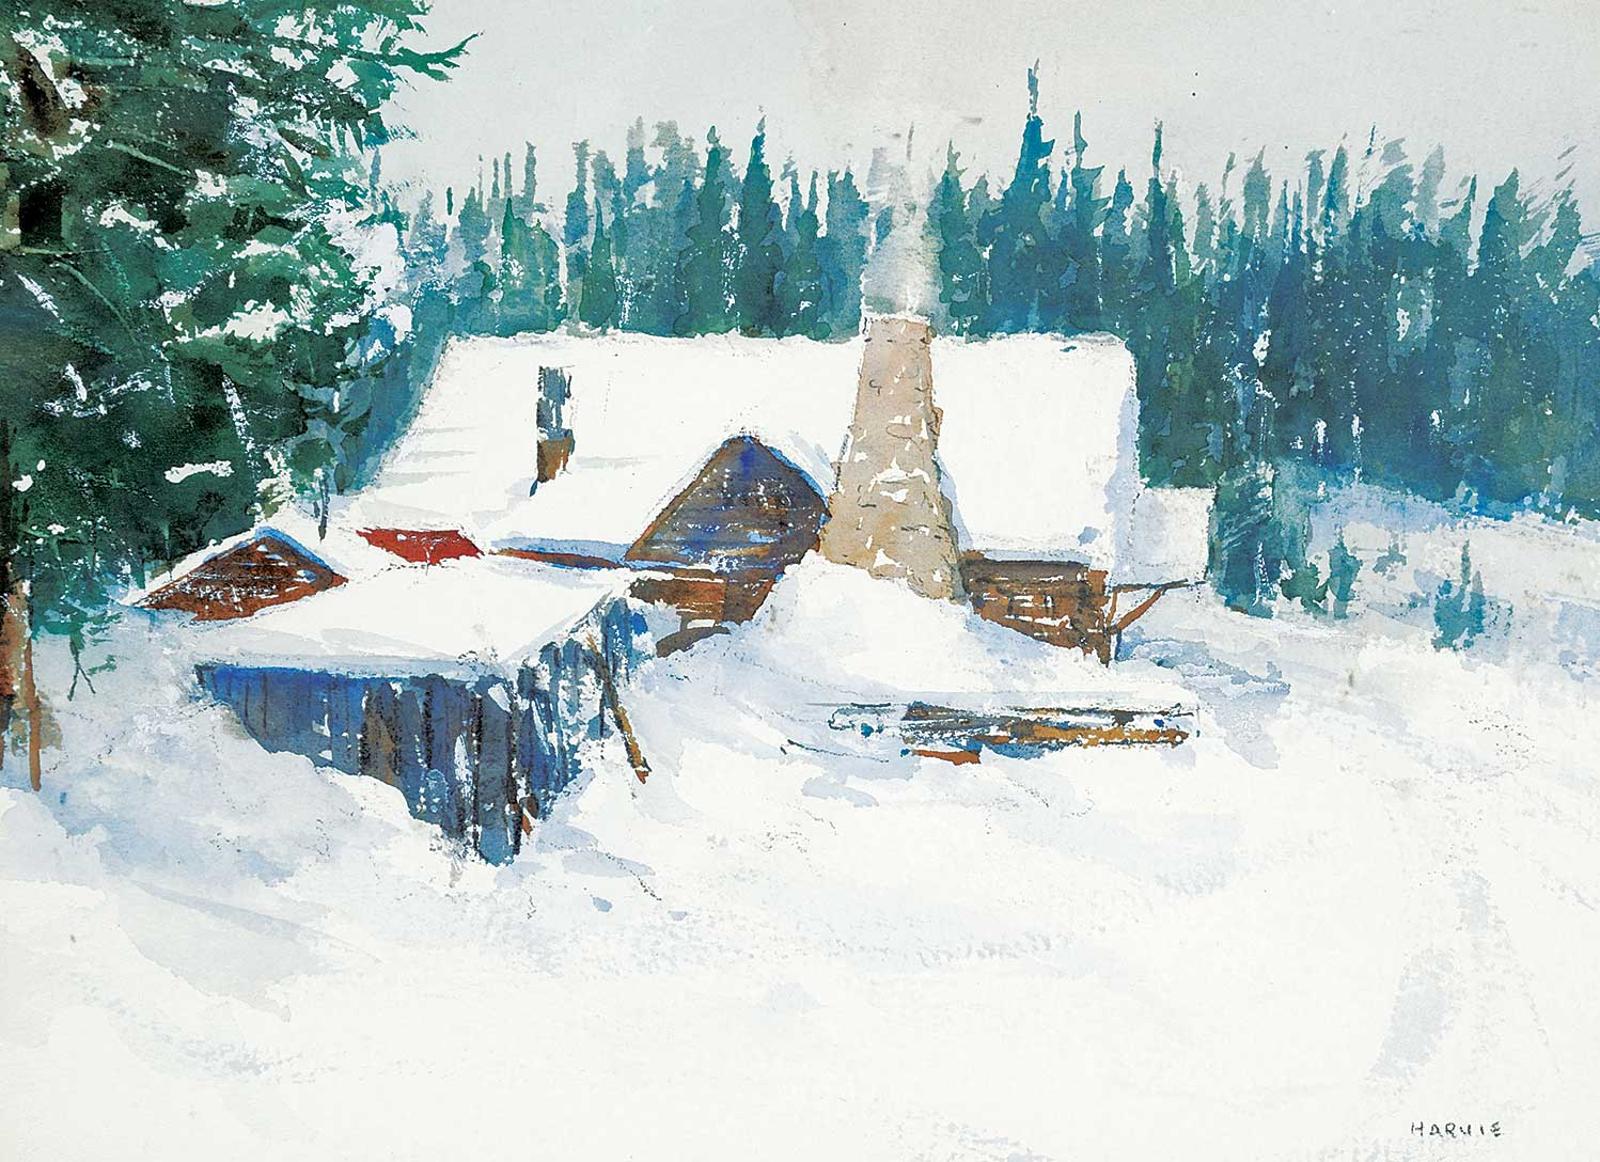 John William Harvie (1928-2018) - View from the Outhouse - Skoki Lodge